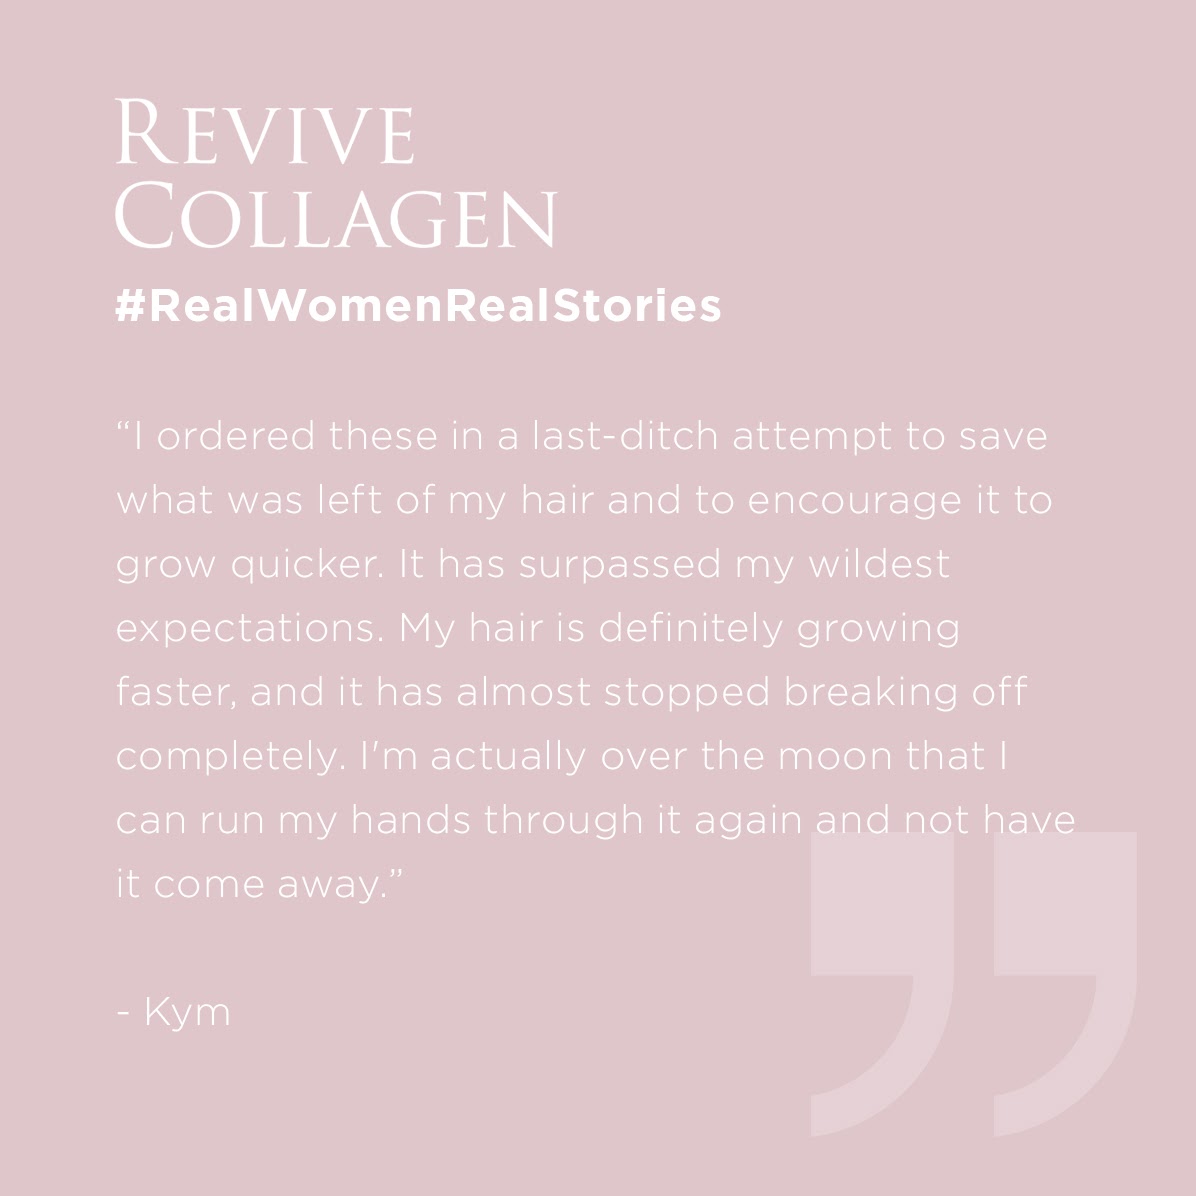 There are many reasons to kick-start your Revive Collagen journey, from increasing hair and nail health to reducing the signs of ageing. Read more Revive Collagen reviews at revivecollagen.com